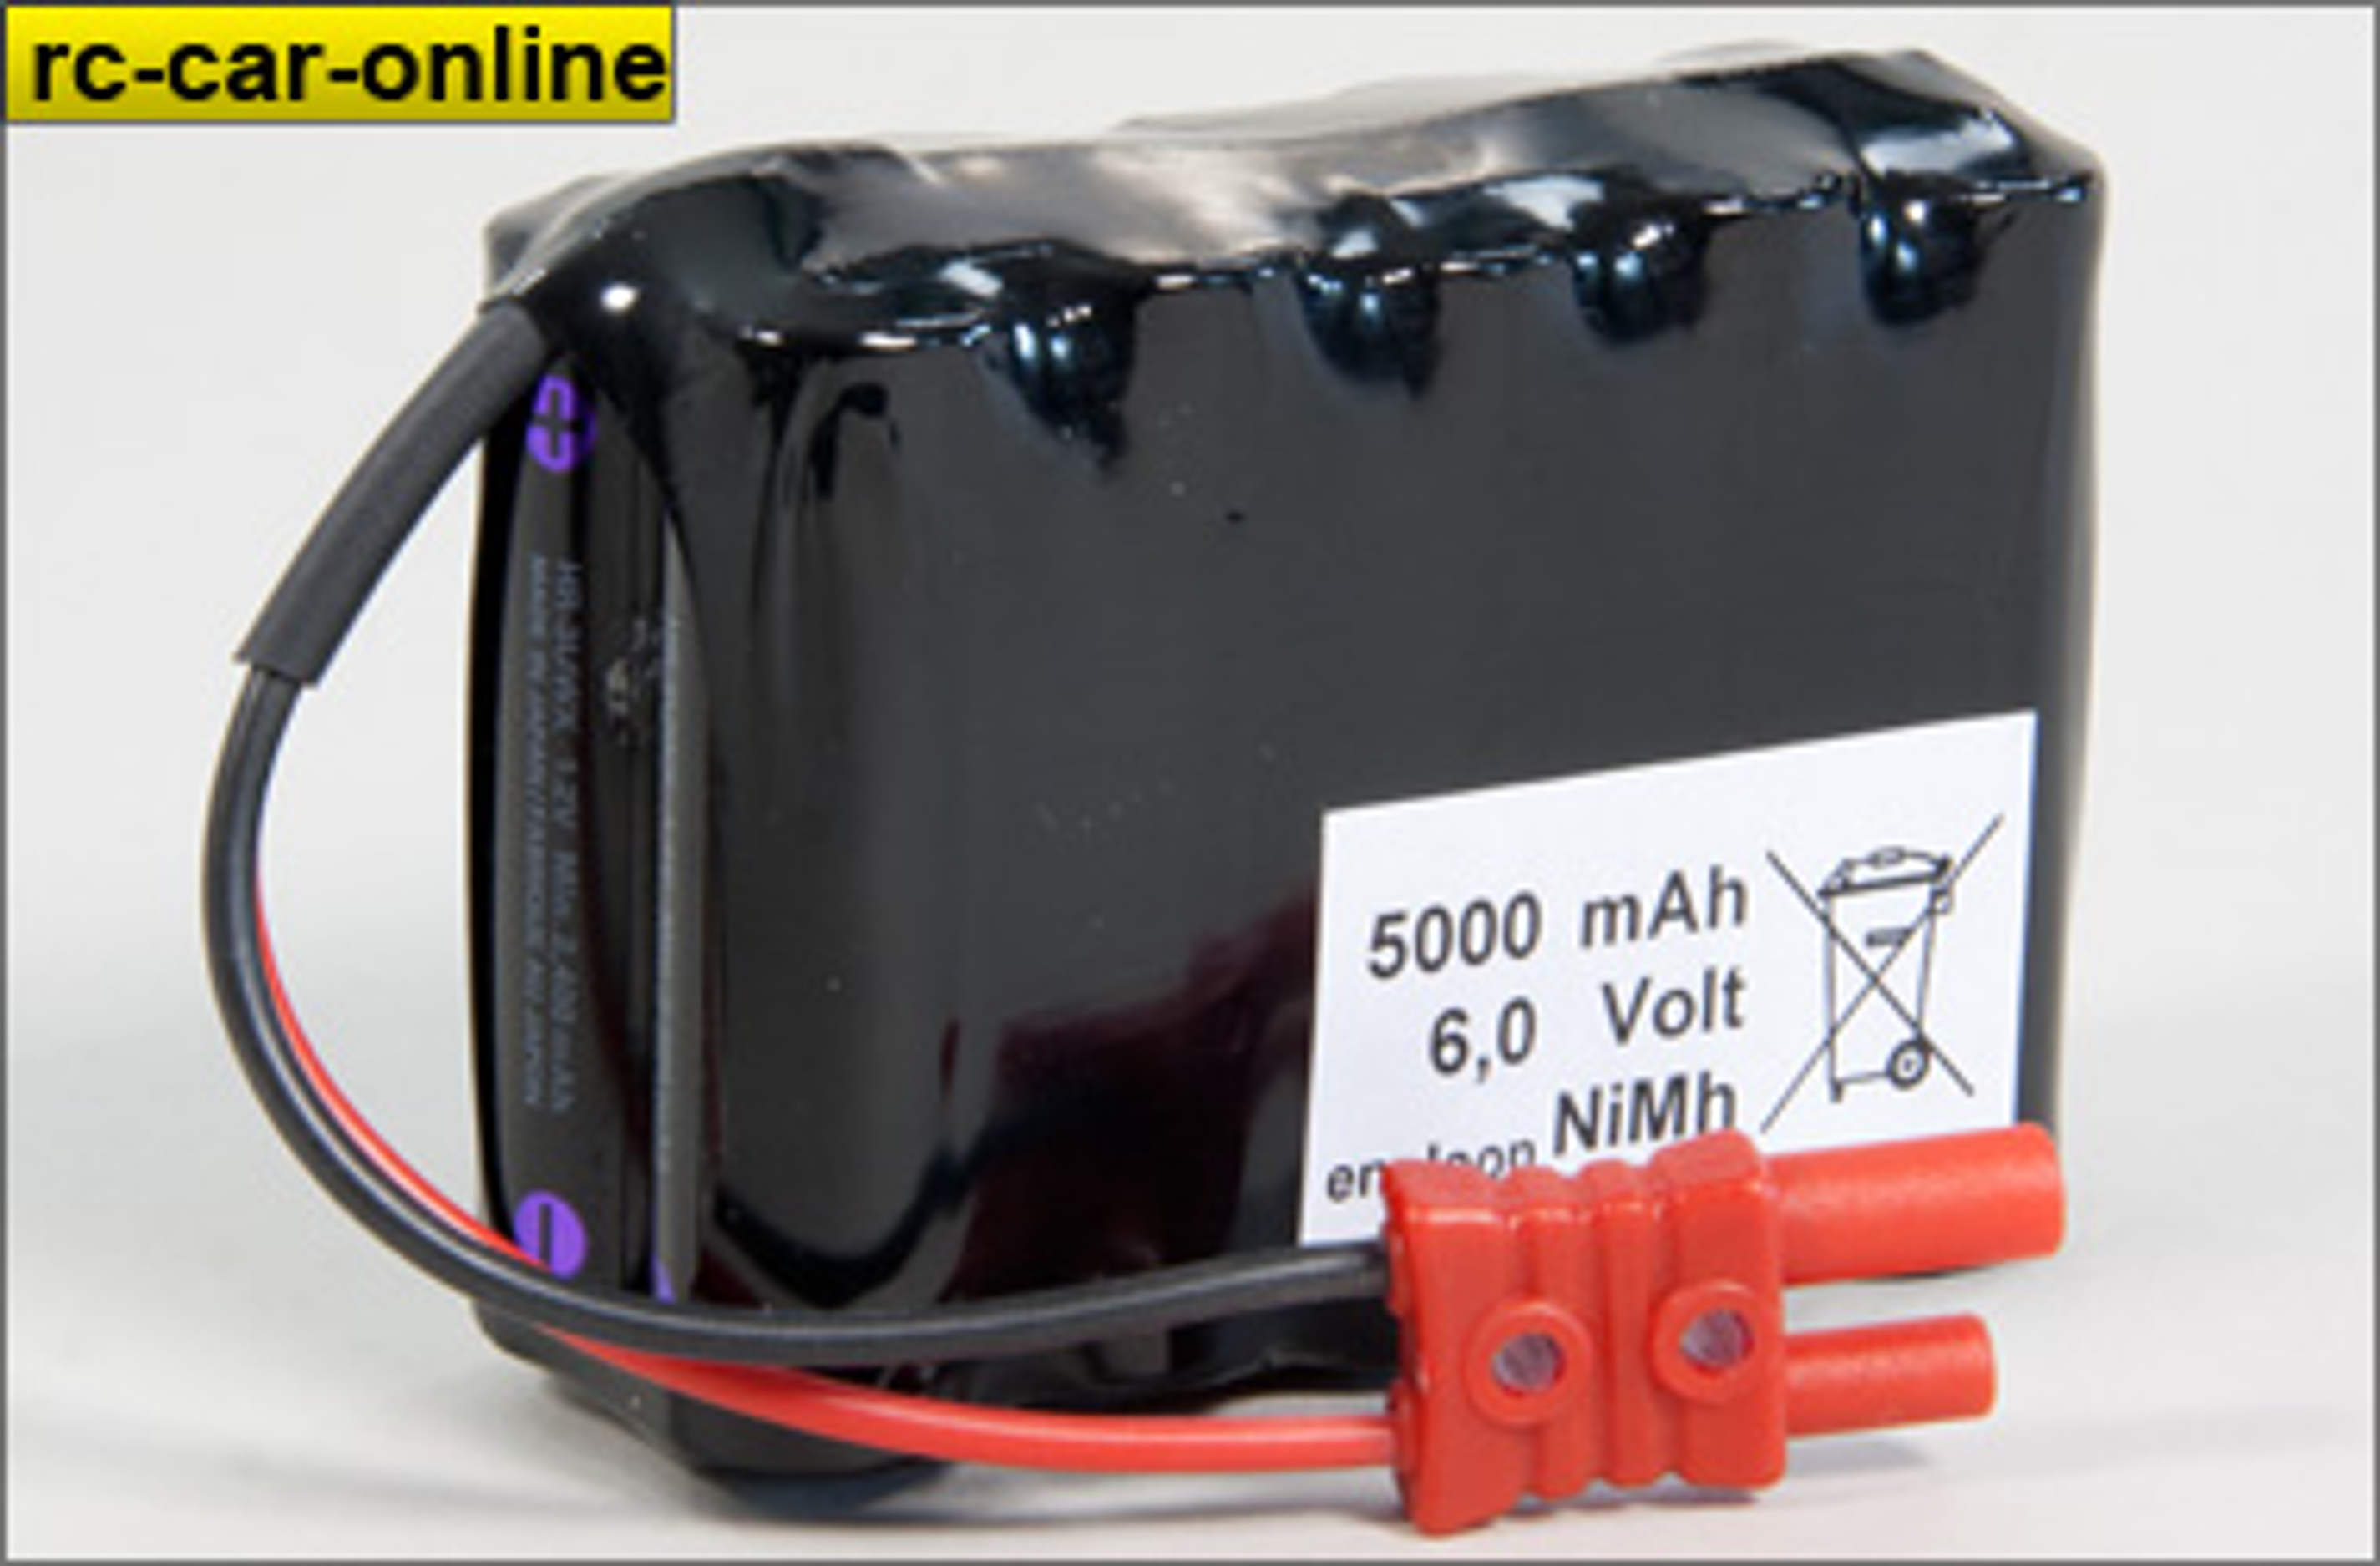 y0675 Receiver battery pack 5000 mAh Ni-Mh  - 1pce.